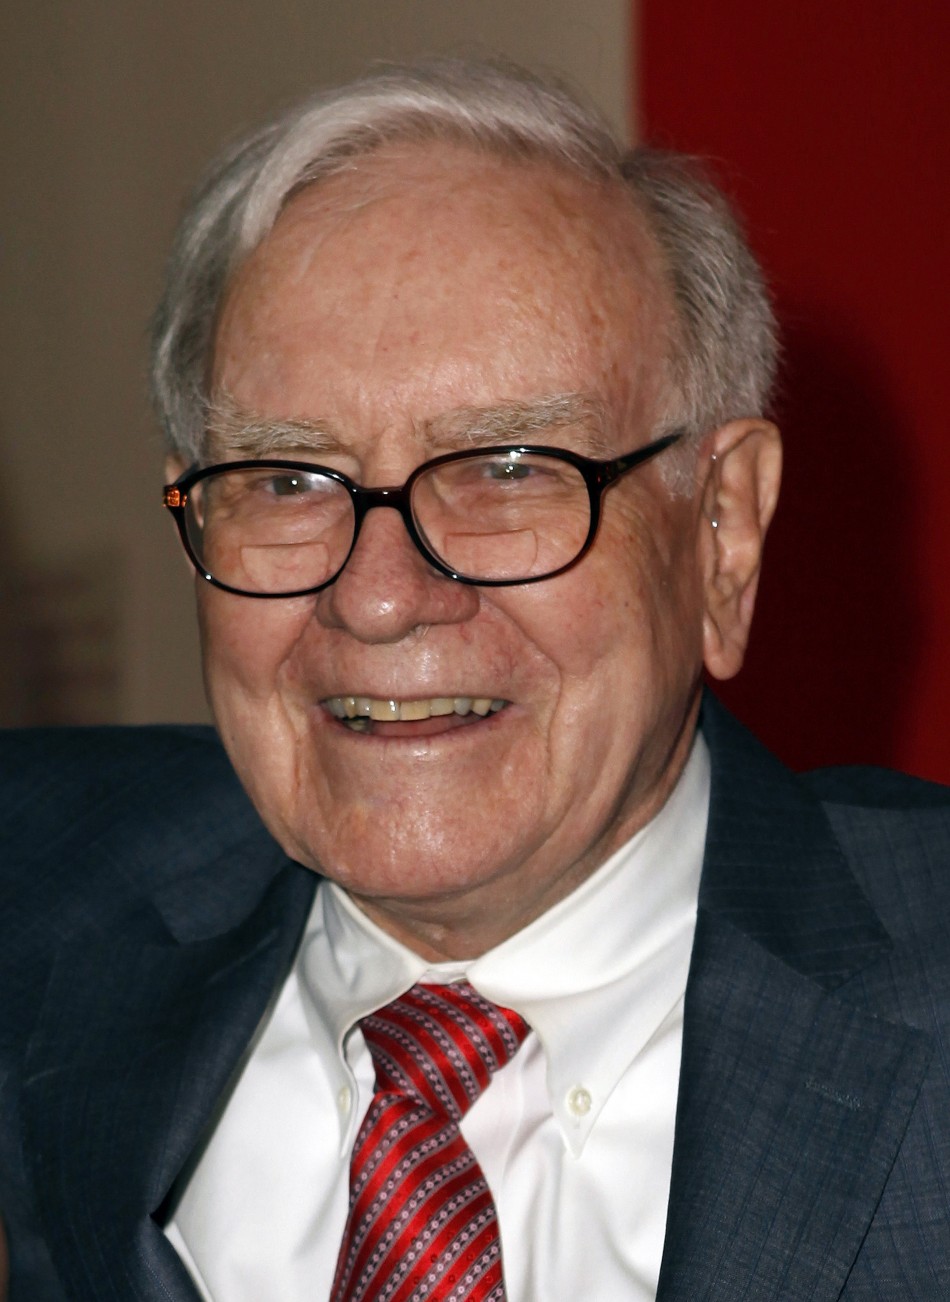 An American business tycoon Warren Buffett is the Chairman  CEO of Berkshire Hathaway. As of 2011, his holdings have been estimated at 39 billion.